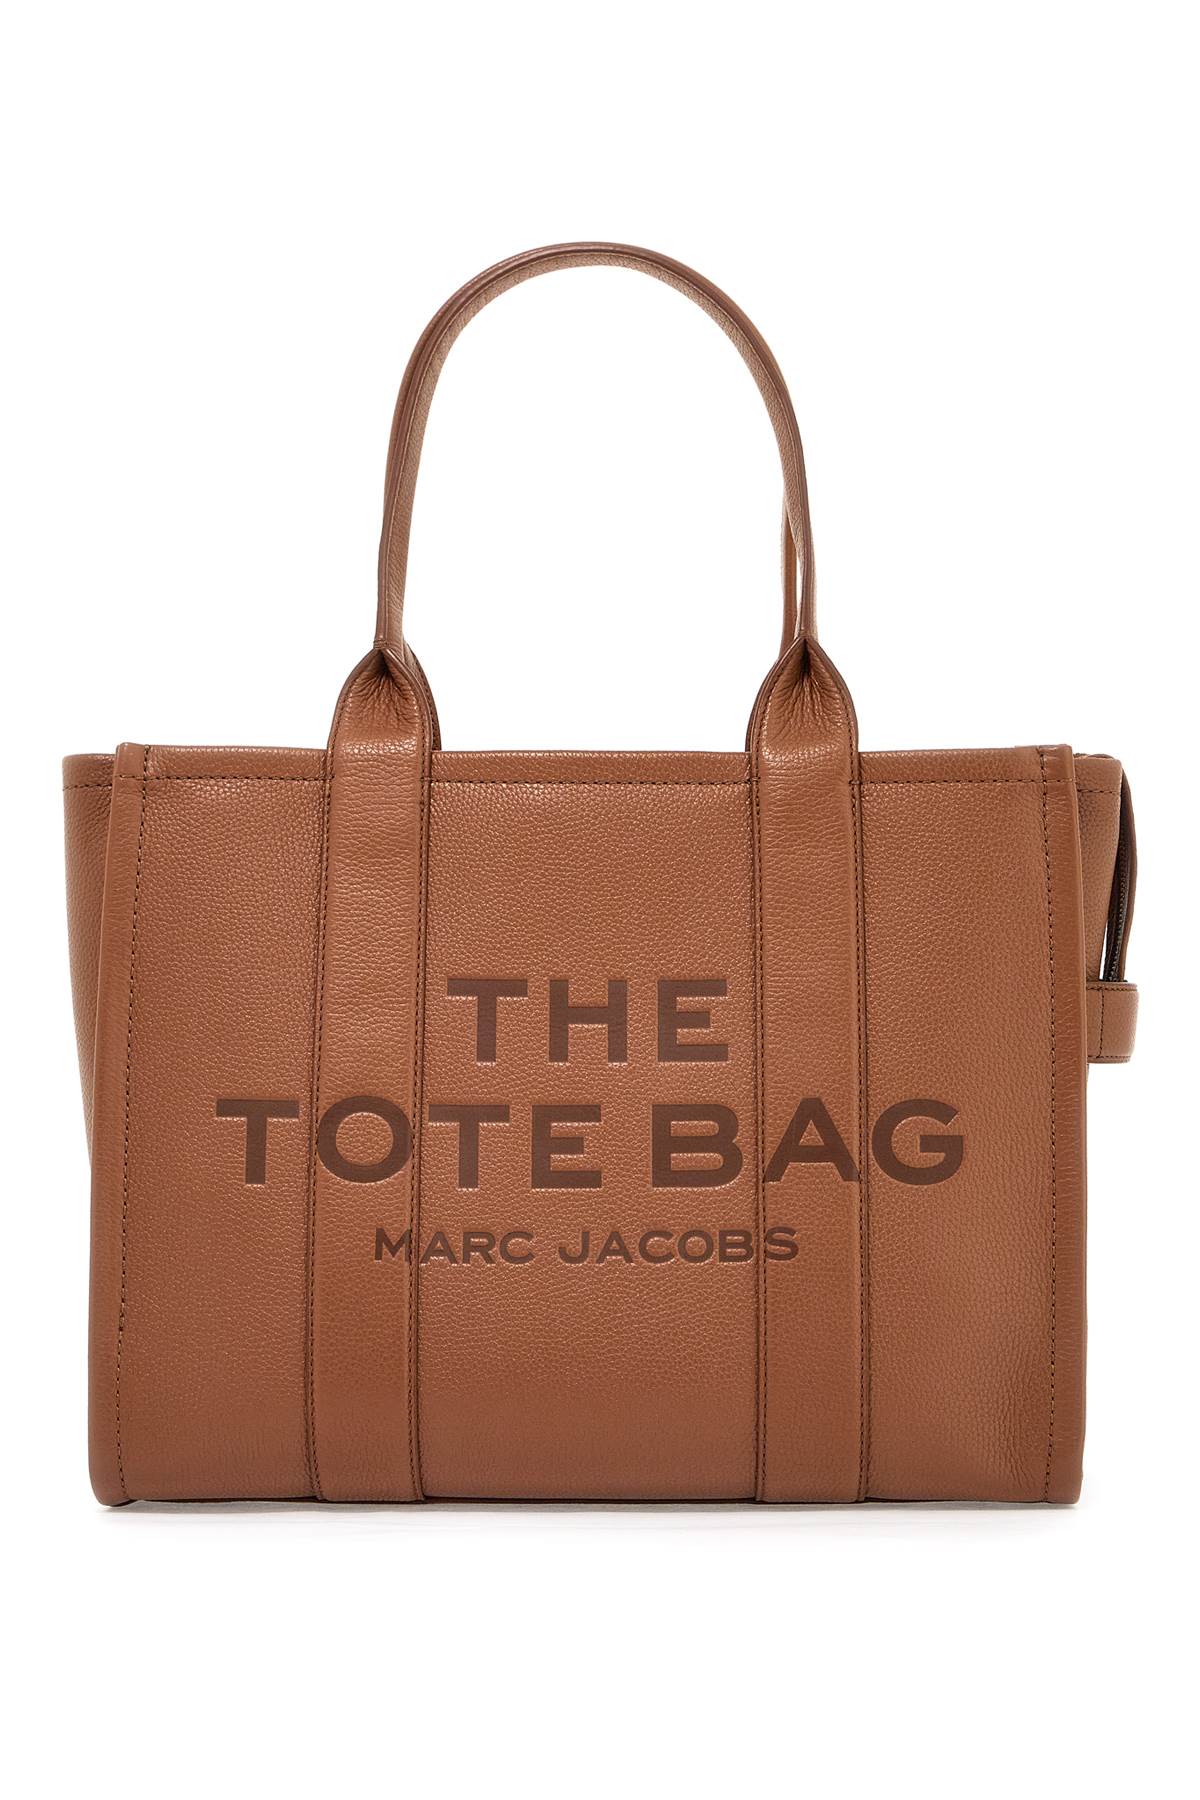 Marc Jacobs MARC JACOBS the leather large tote bag